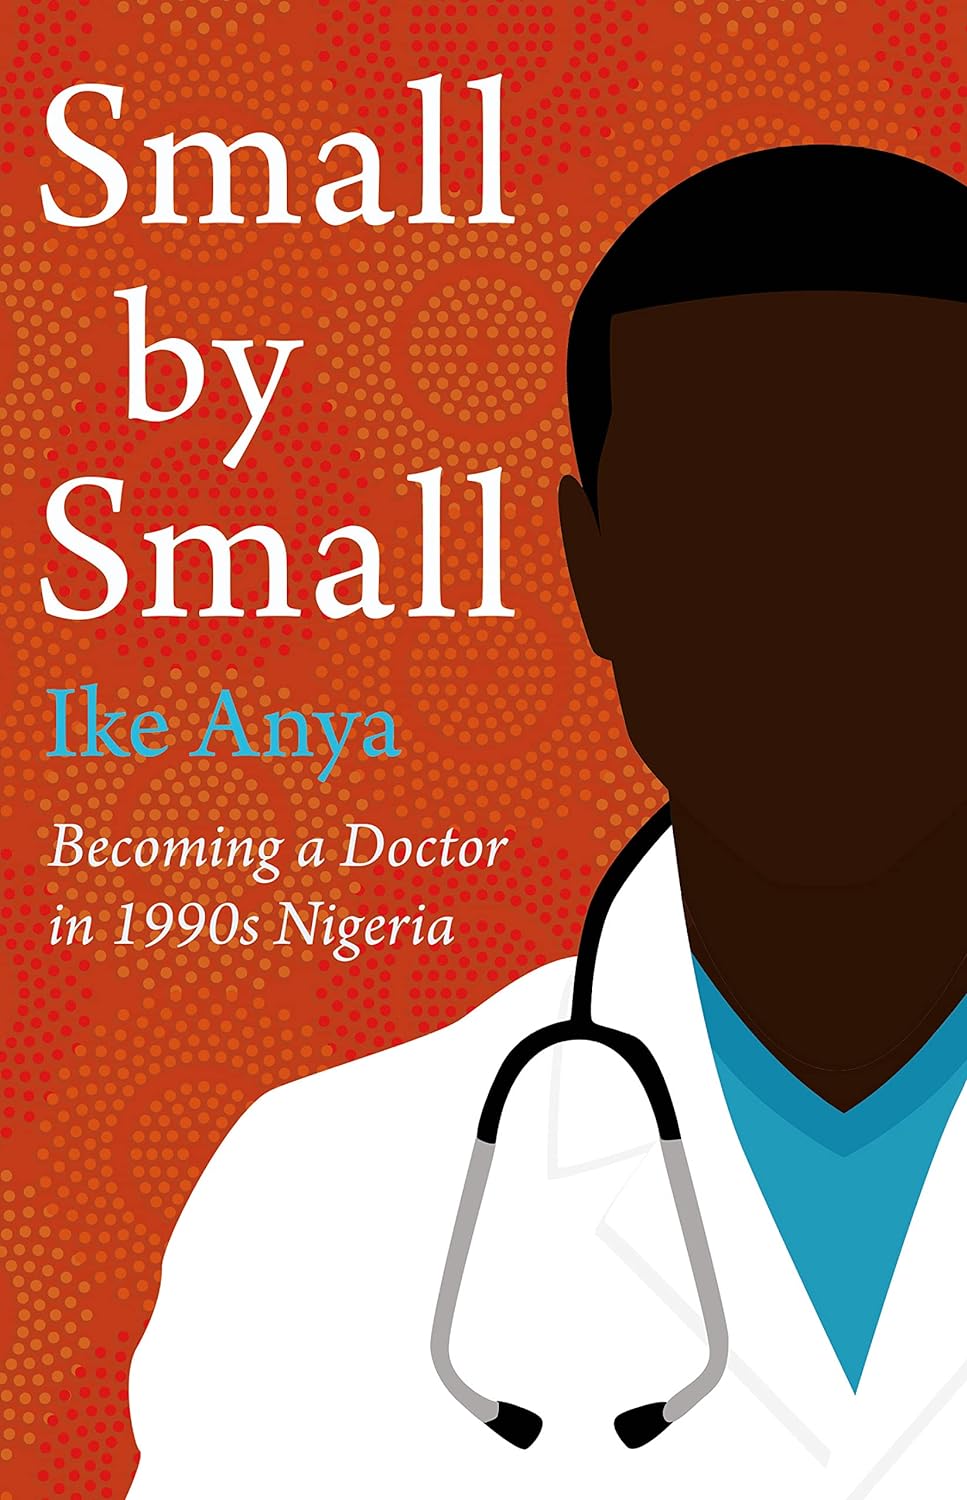 Small by Small: Becoming a Doctor in 1990s